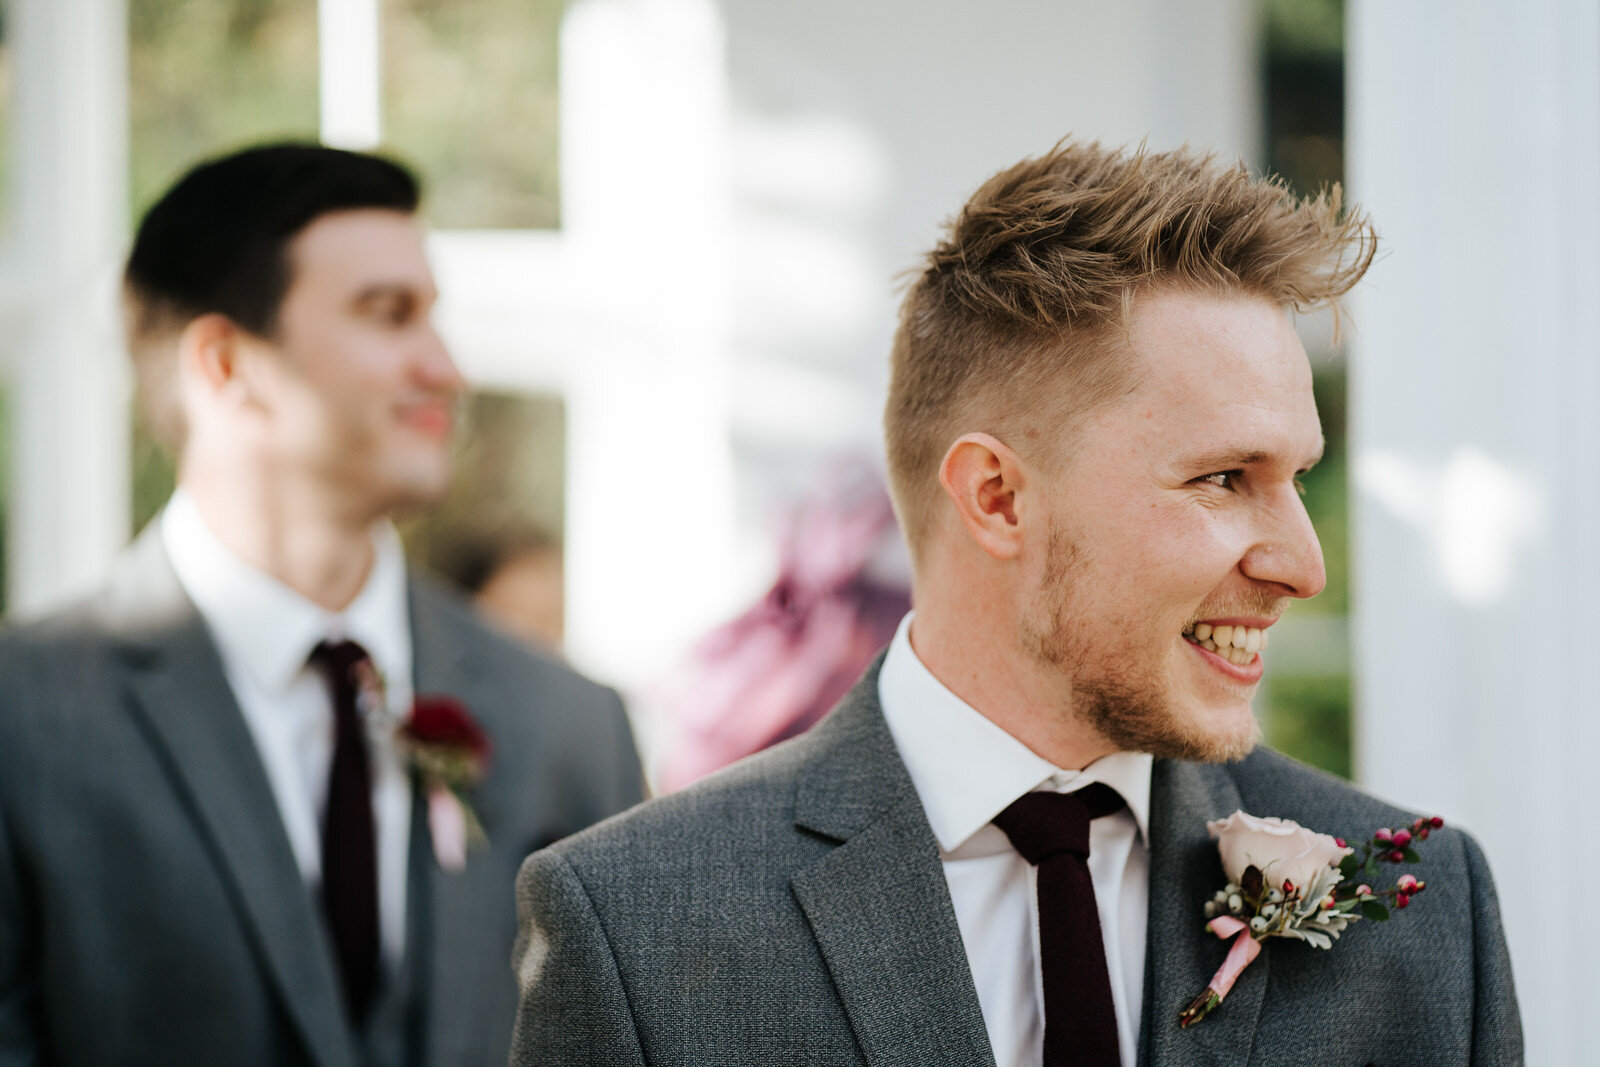 Groom is at the front of the aisle and reacts to seeing the bride walking down the aisle